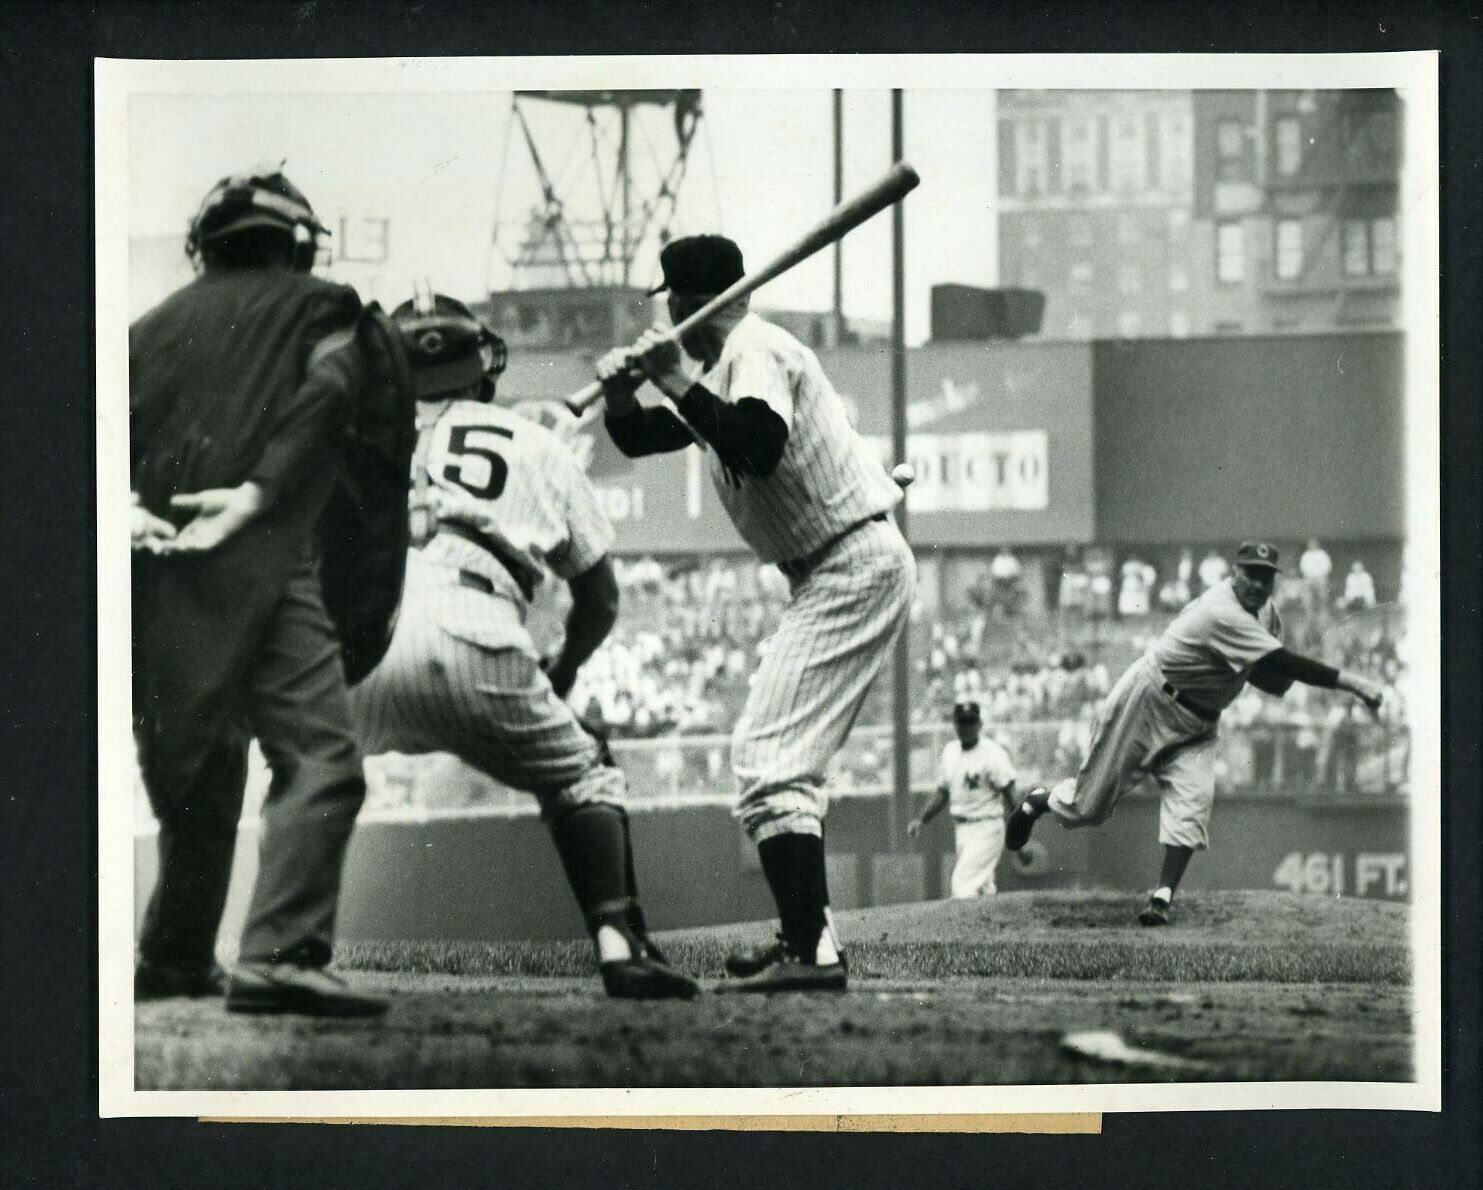 Dizzy Dean pitches to Red Rolfe 1959 Yankees Old Timers' Game Press Photo Poster painting Cubs